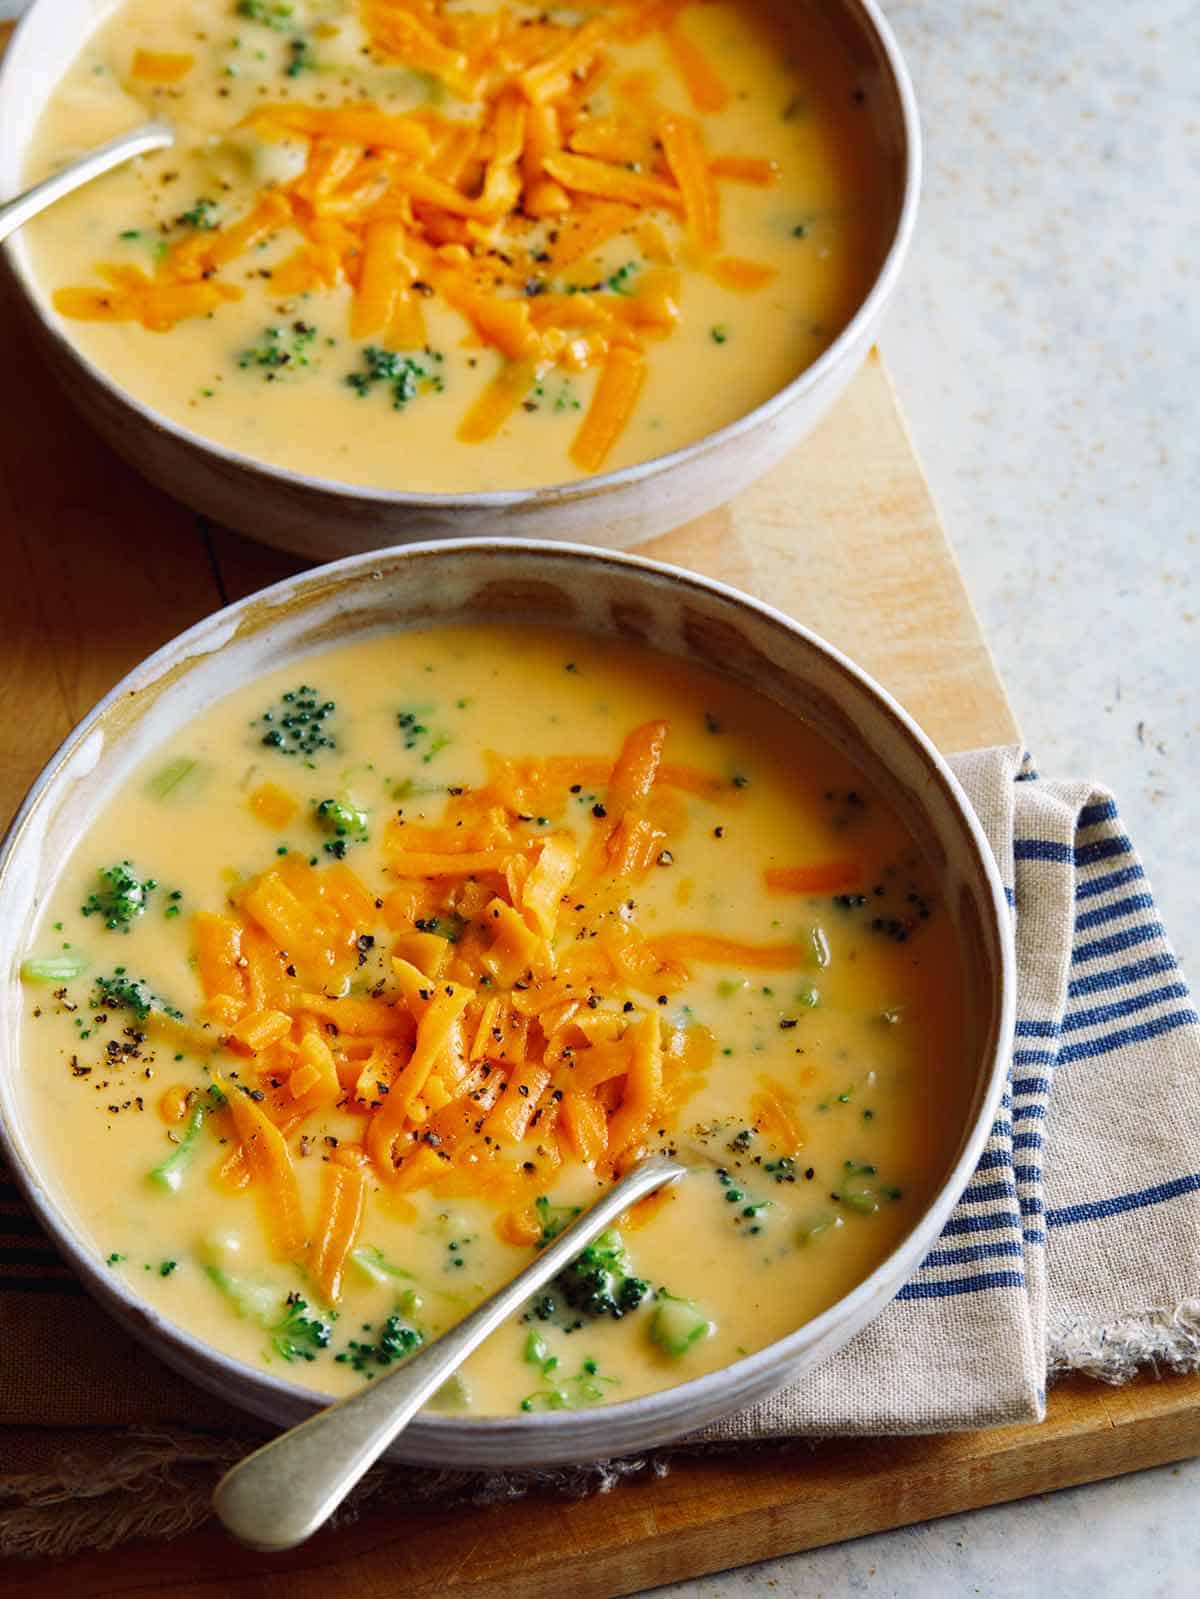 Two bowls of cheddar broccoli soup topped with some more shredded cheese.